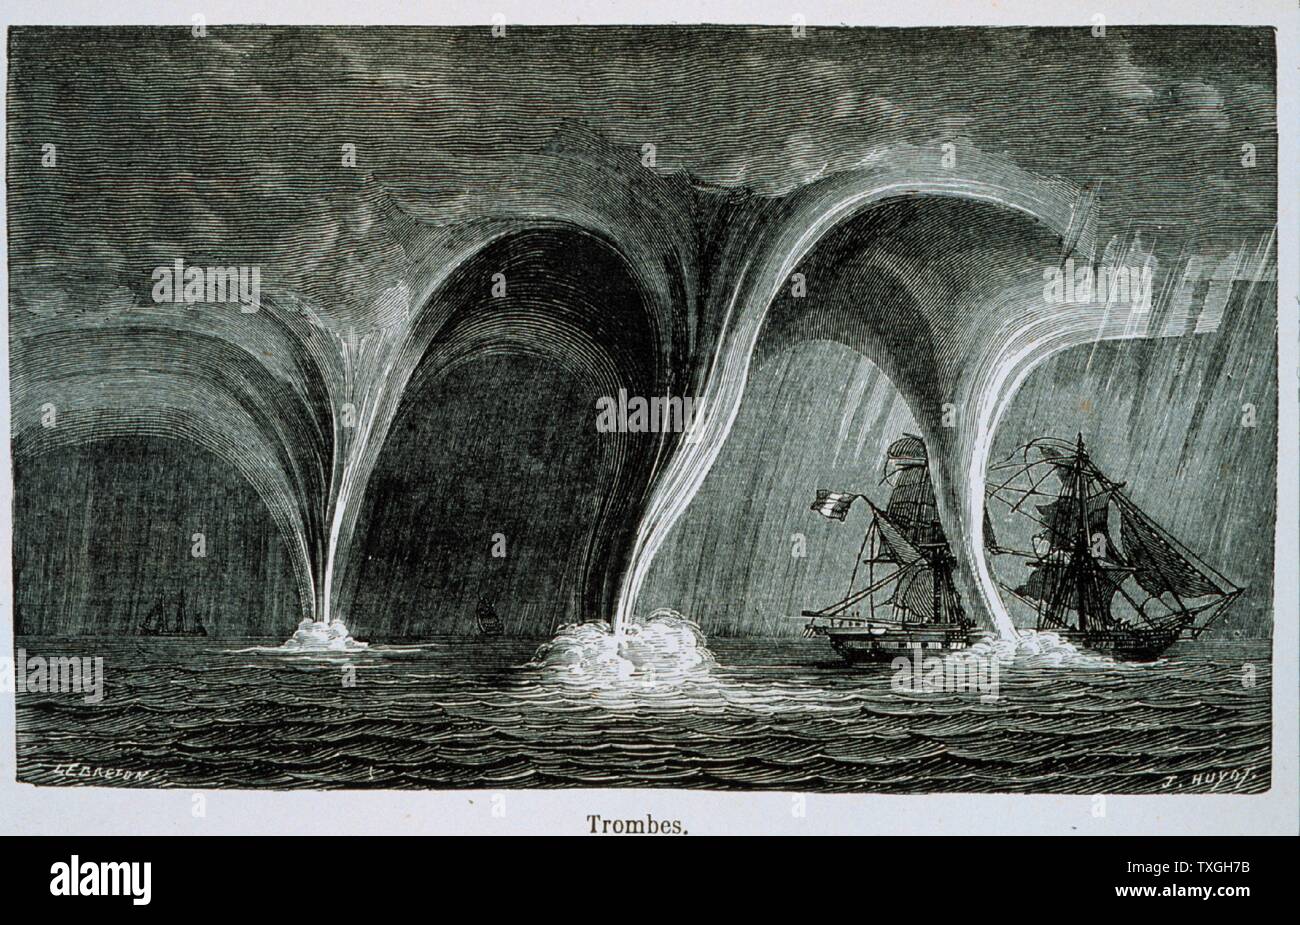 Illustration of the 'Trombes' sailing vessel in hurricane conditions, from 'Les Meteores'. Dated 1869 Stock Photo